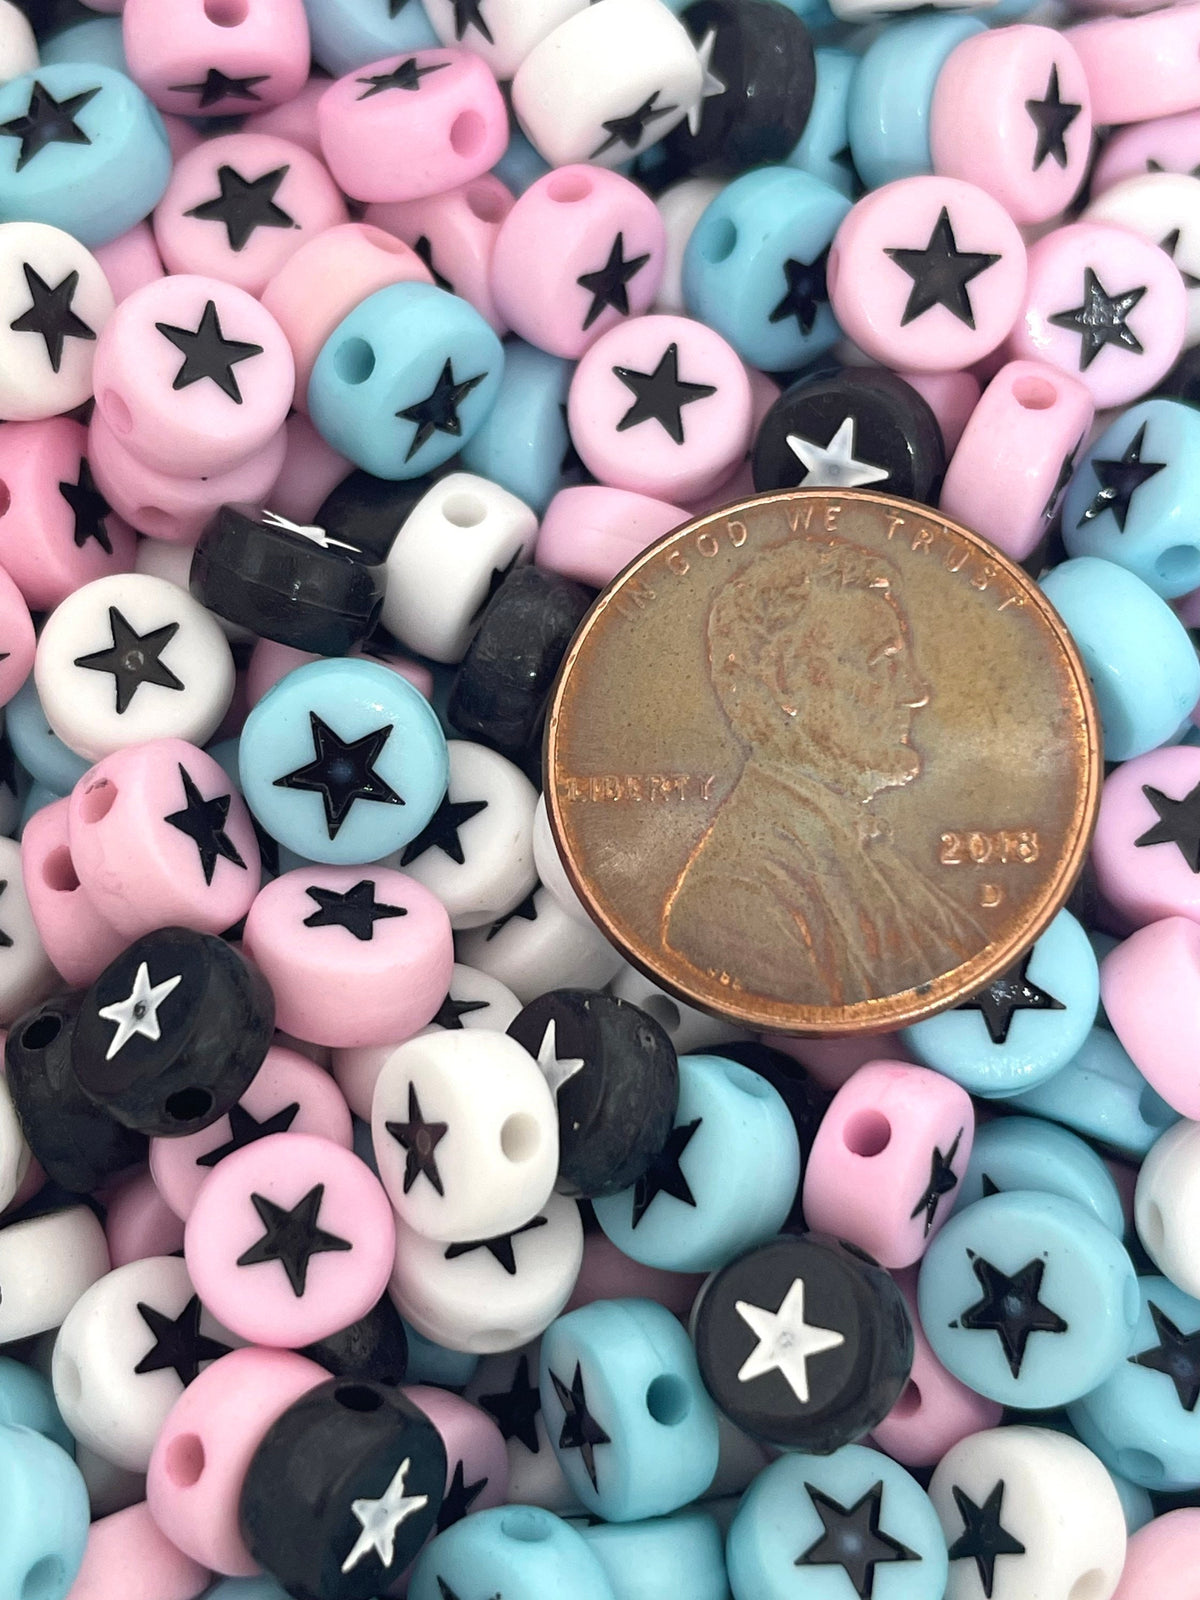 Black Star Coin Beads, Black Spacer Letter Beads for Jewelry